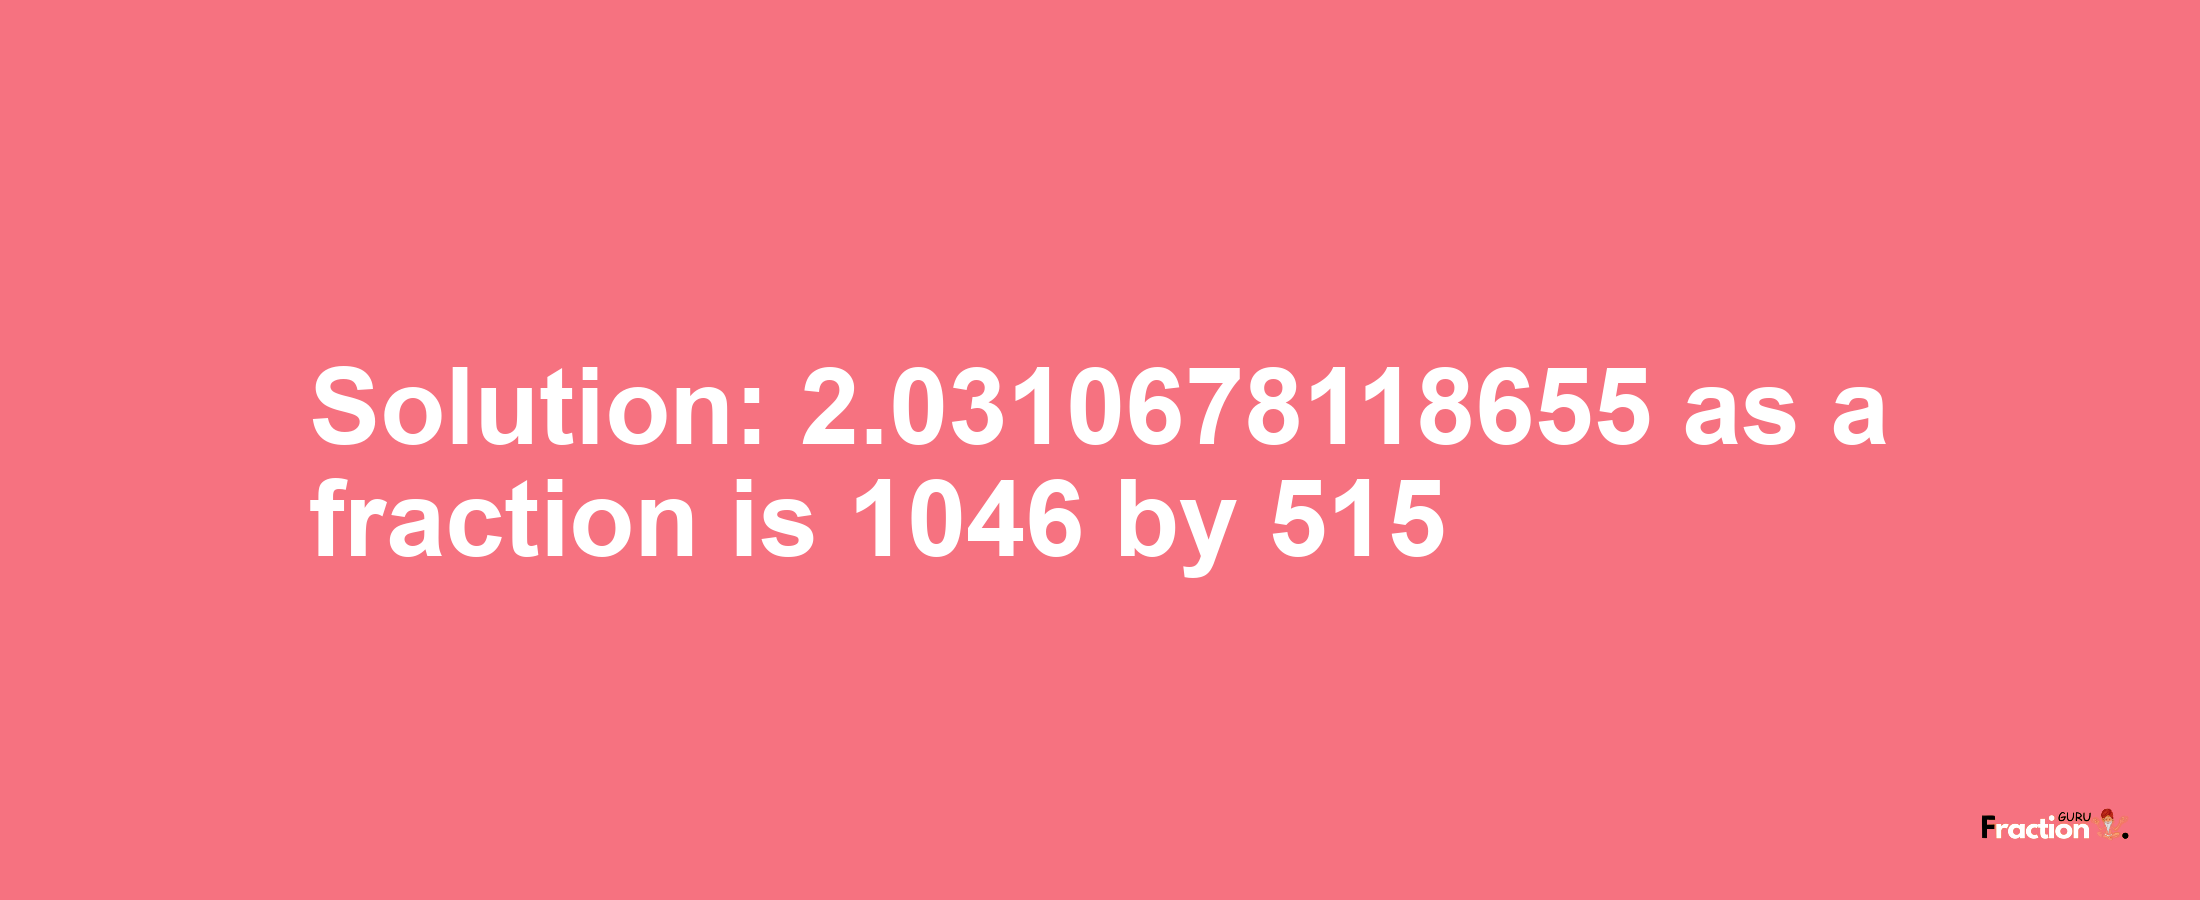 Solution:2.0310678118655 as a fraction is 1046/515